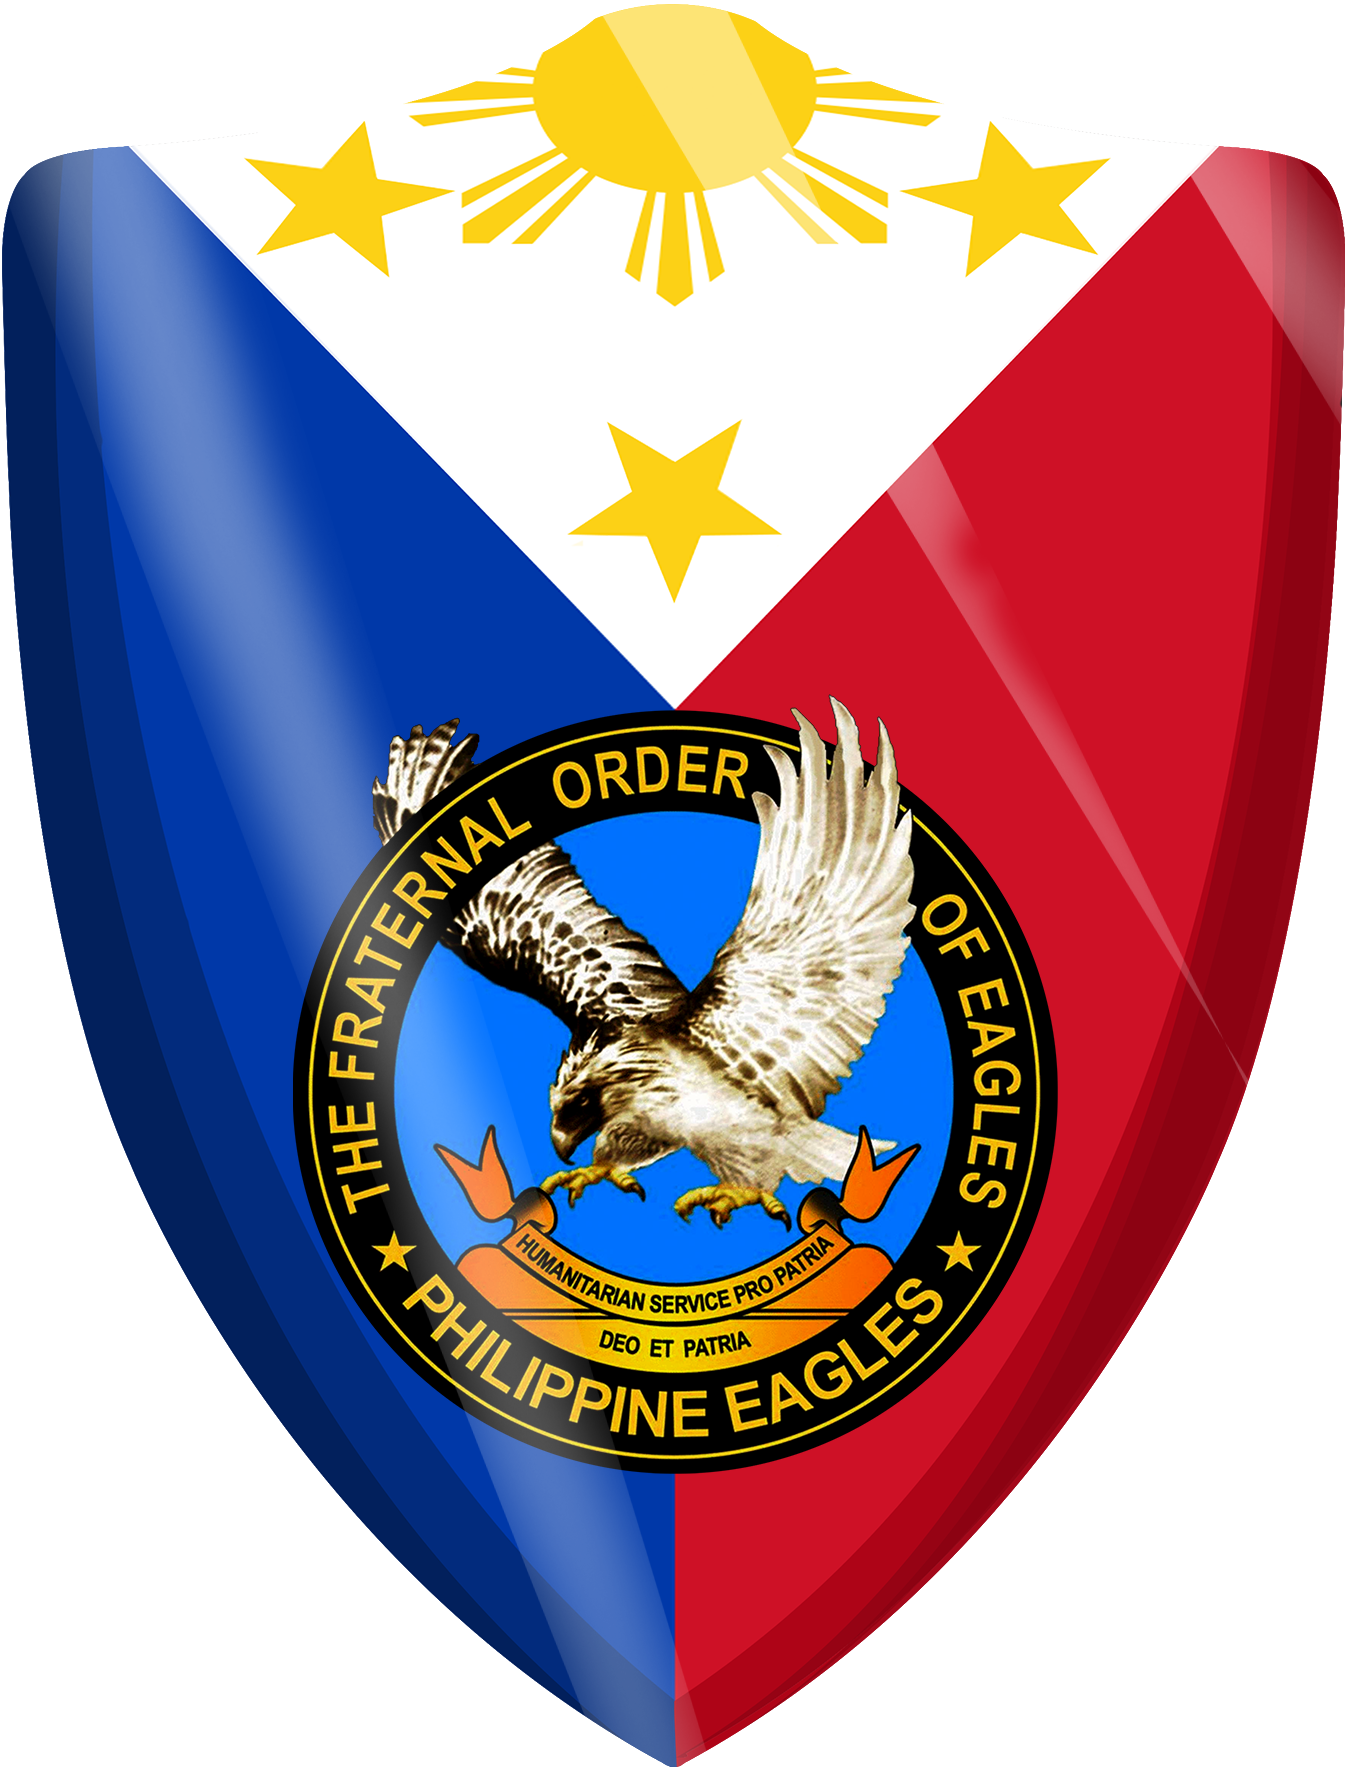 The - The Fraternal Order of Eagles - Philippine Eagles